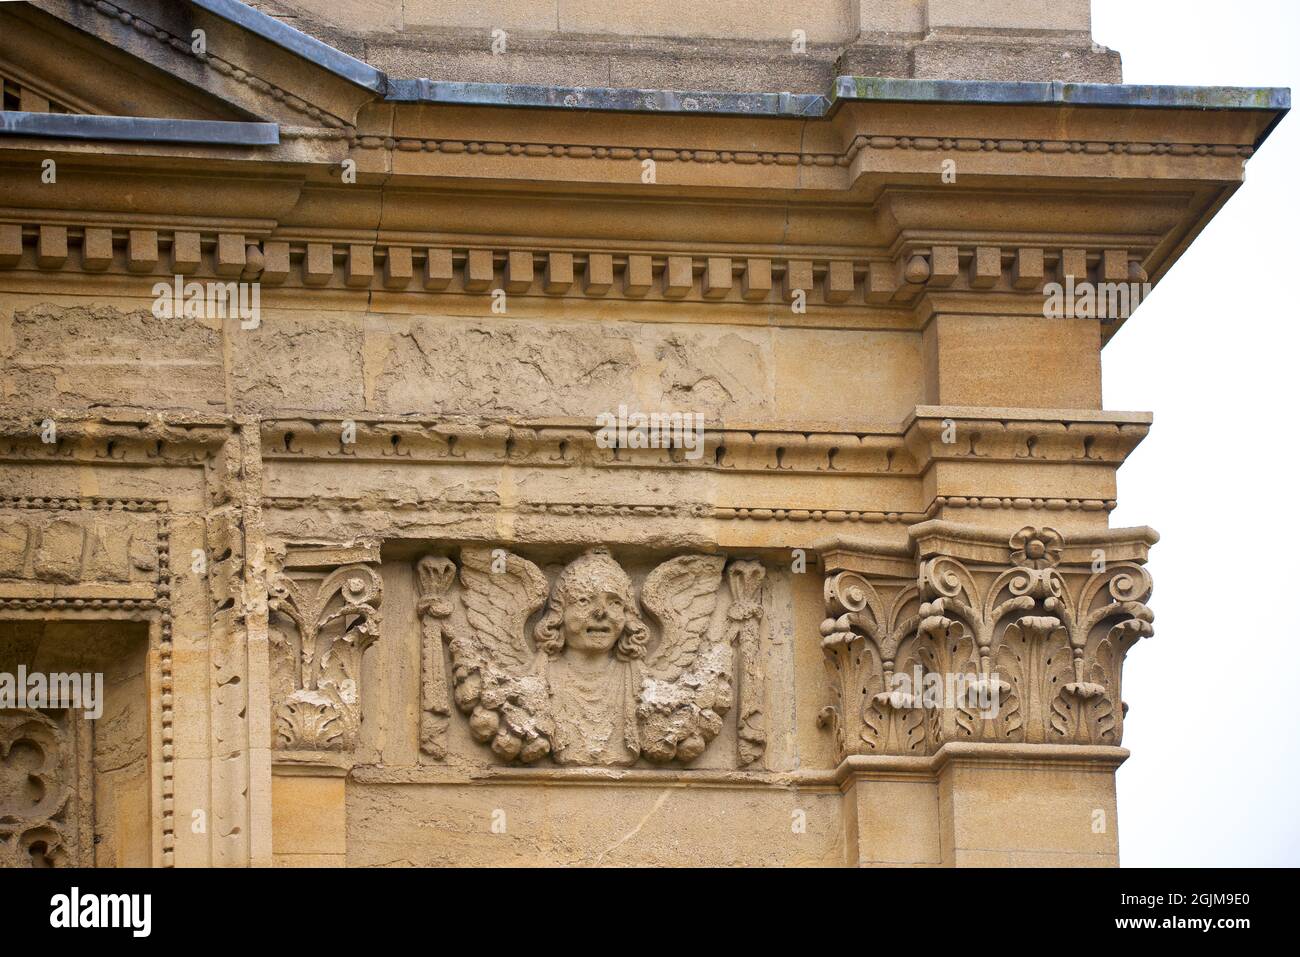 Detail of stone carving on the exterior of Brasenose College Chapel, University of Oxford, Oxford, England, UK. Angel wings Stock Photo